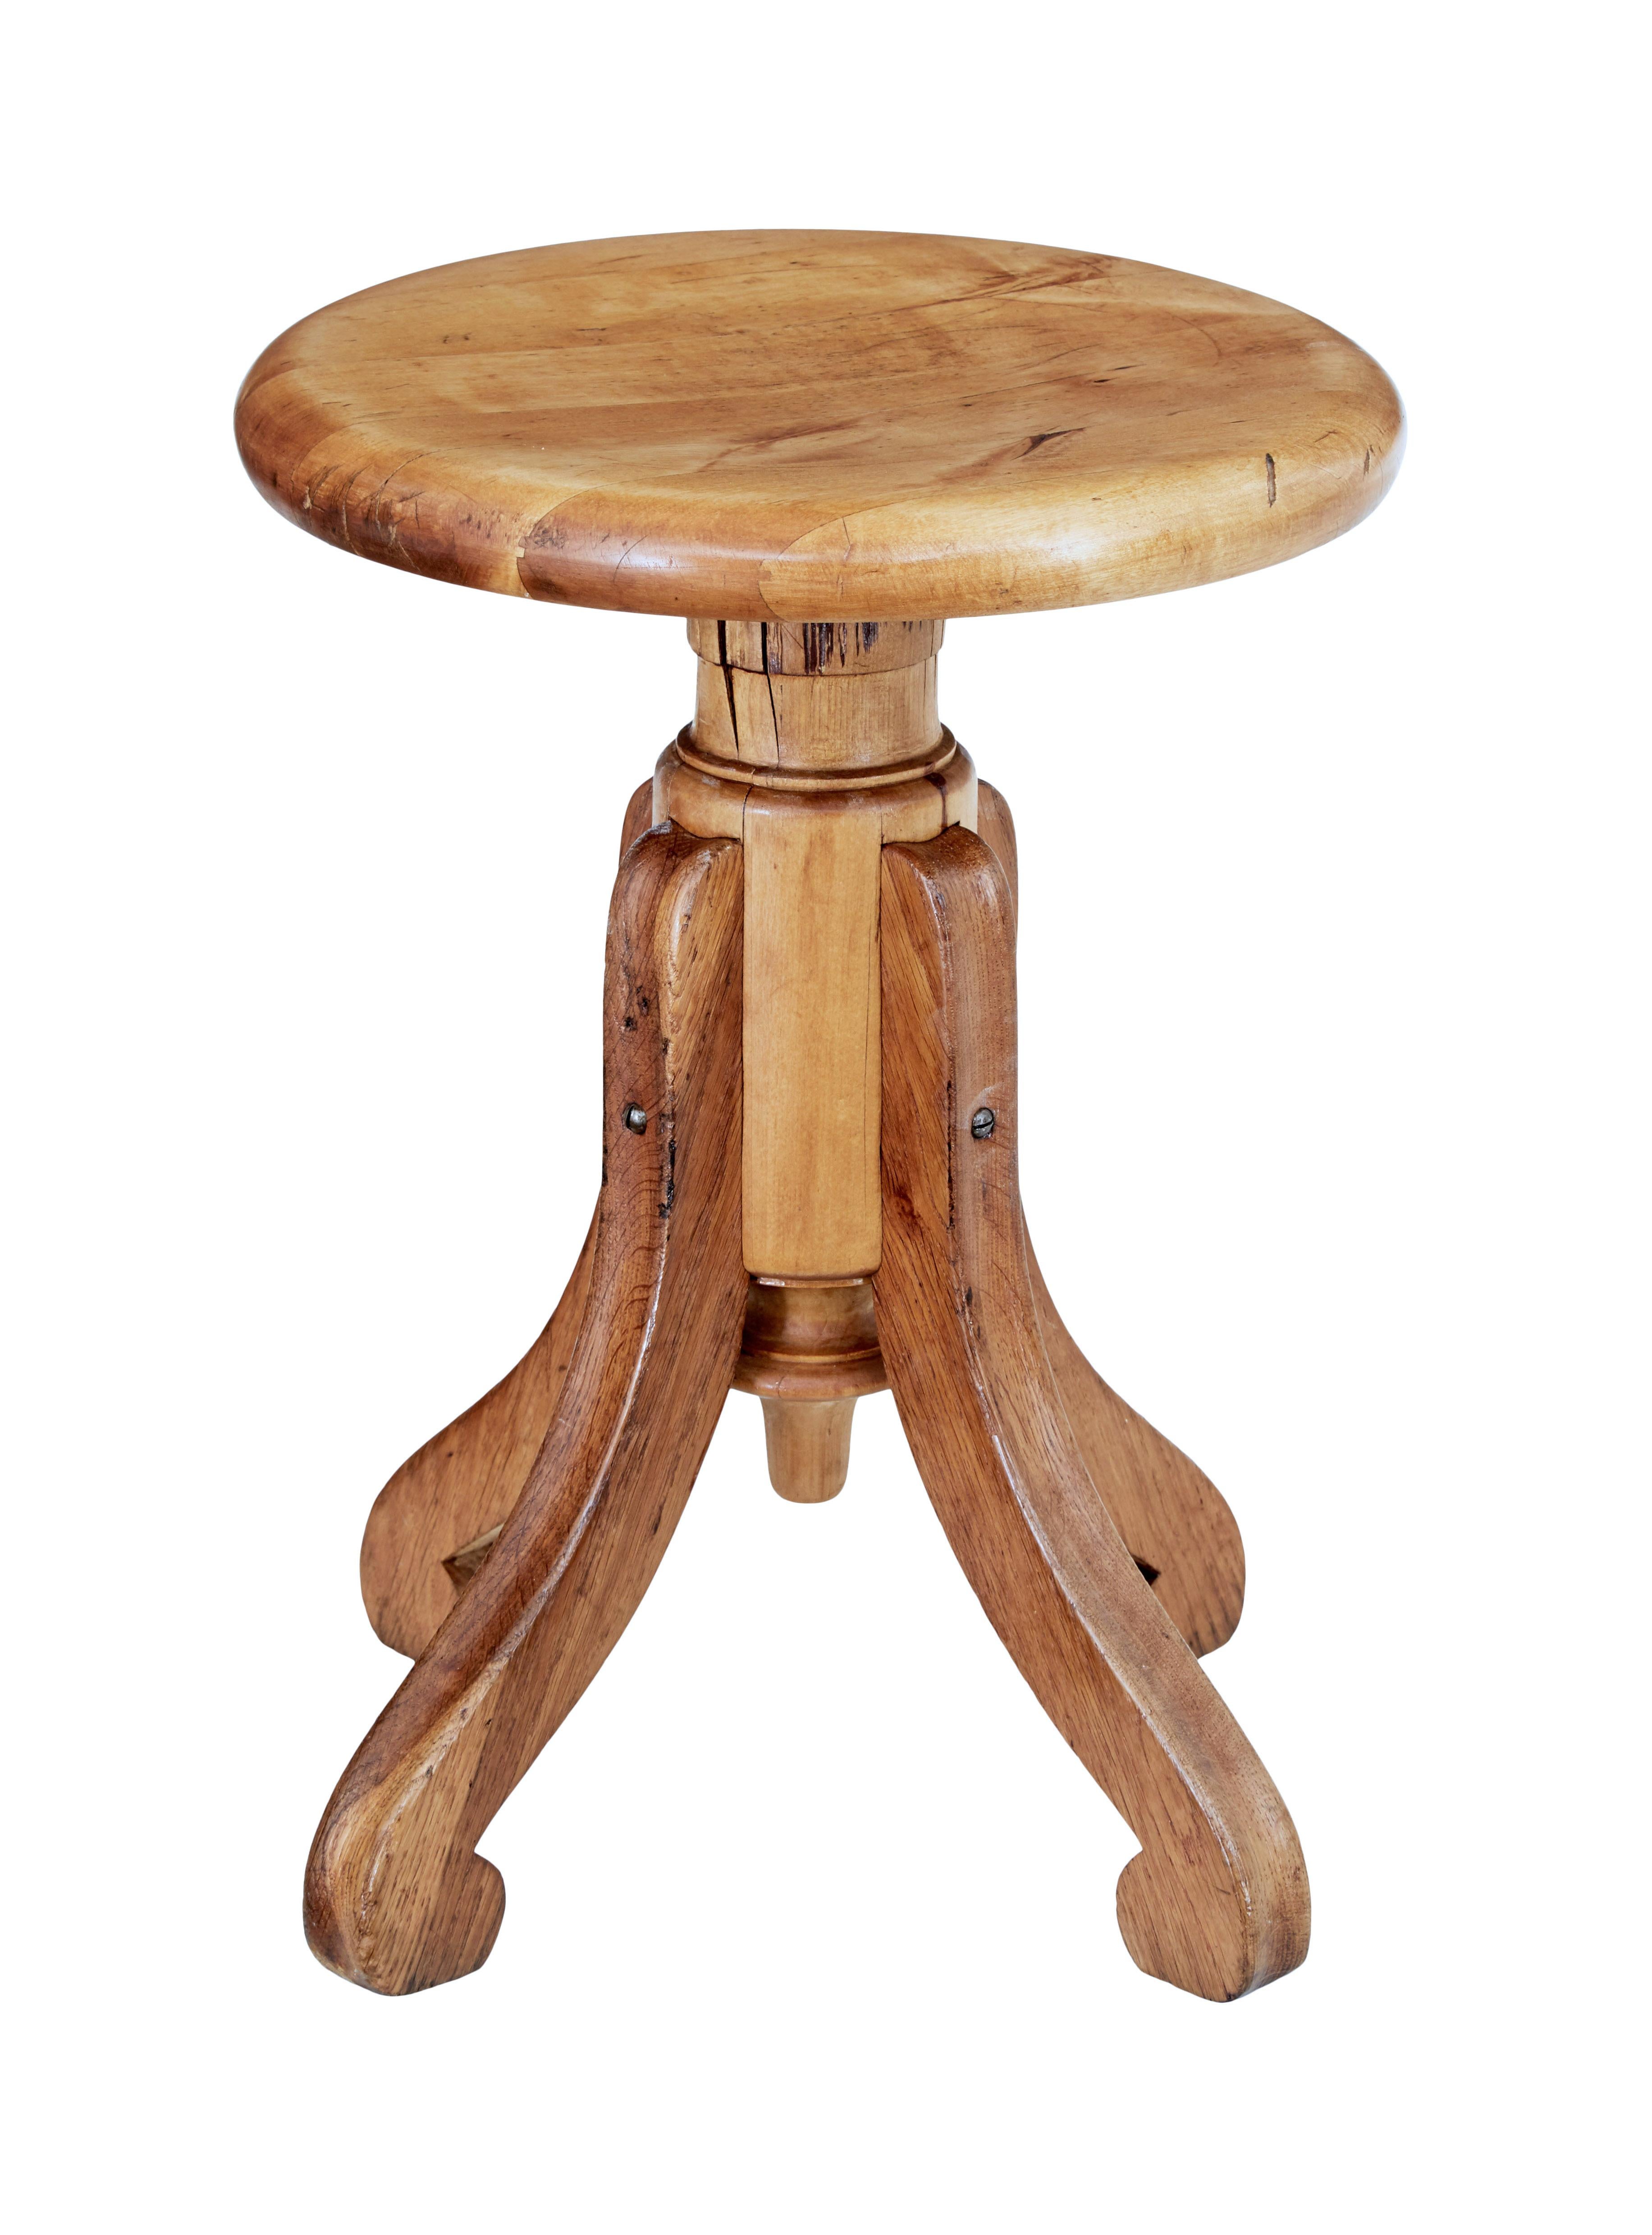 Late 19th century oak and pine piano stool, circa 1890.

Good quality stool with plenty of character. Shaped circular seat connected to a thread which allows a 4 inch variation in height. Supported by 4 scrolled legs.

Could lend itself